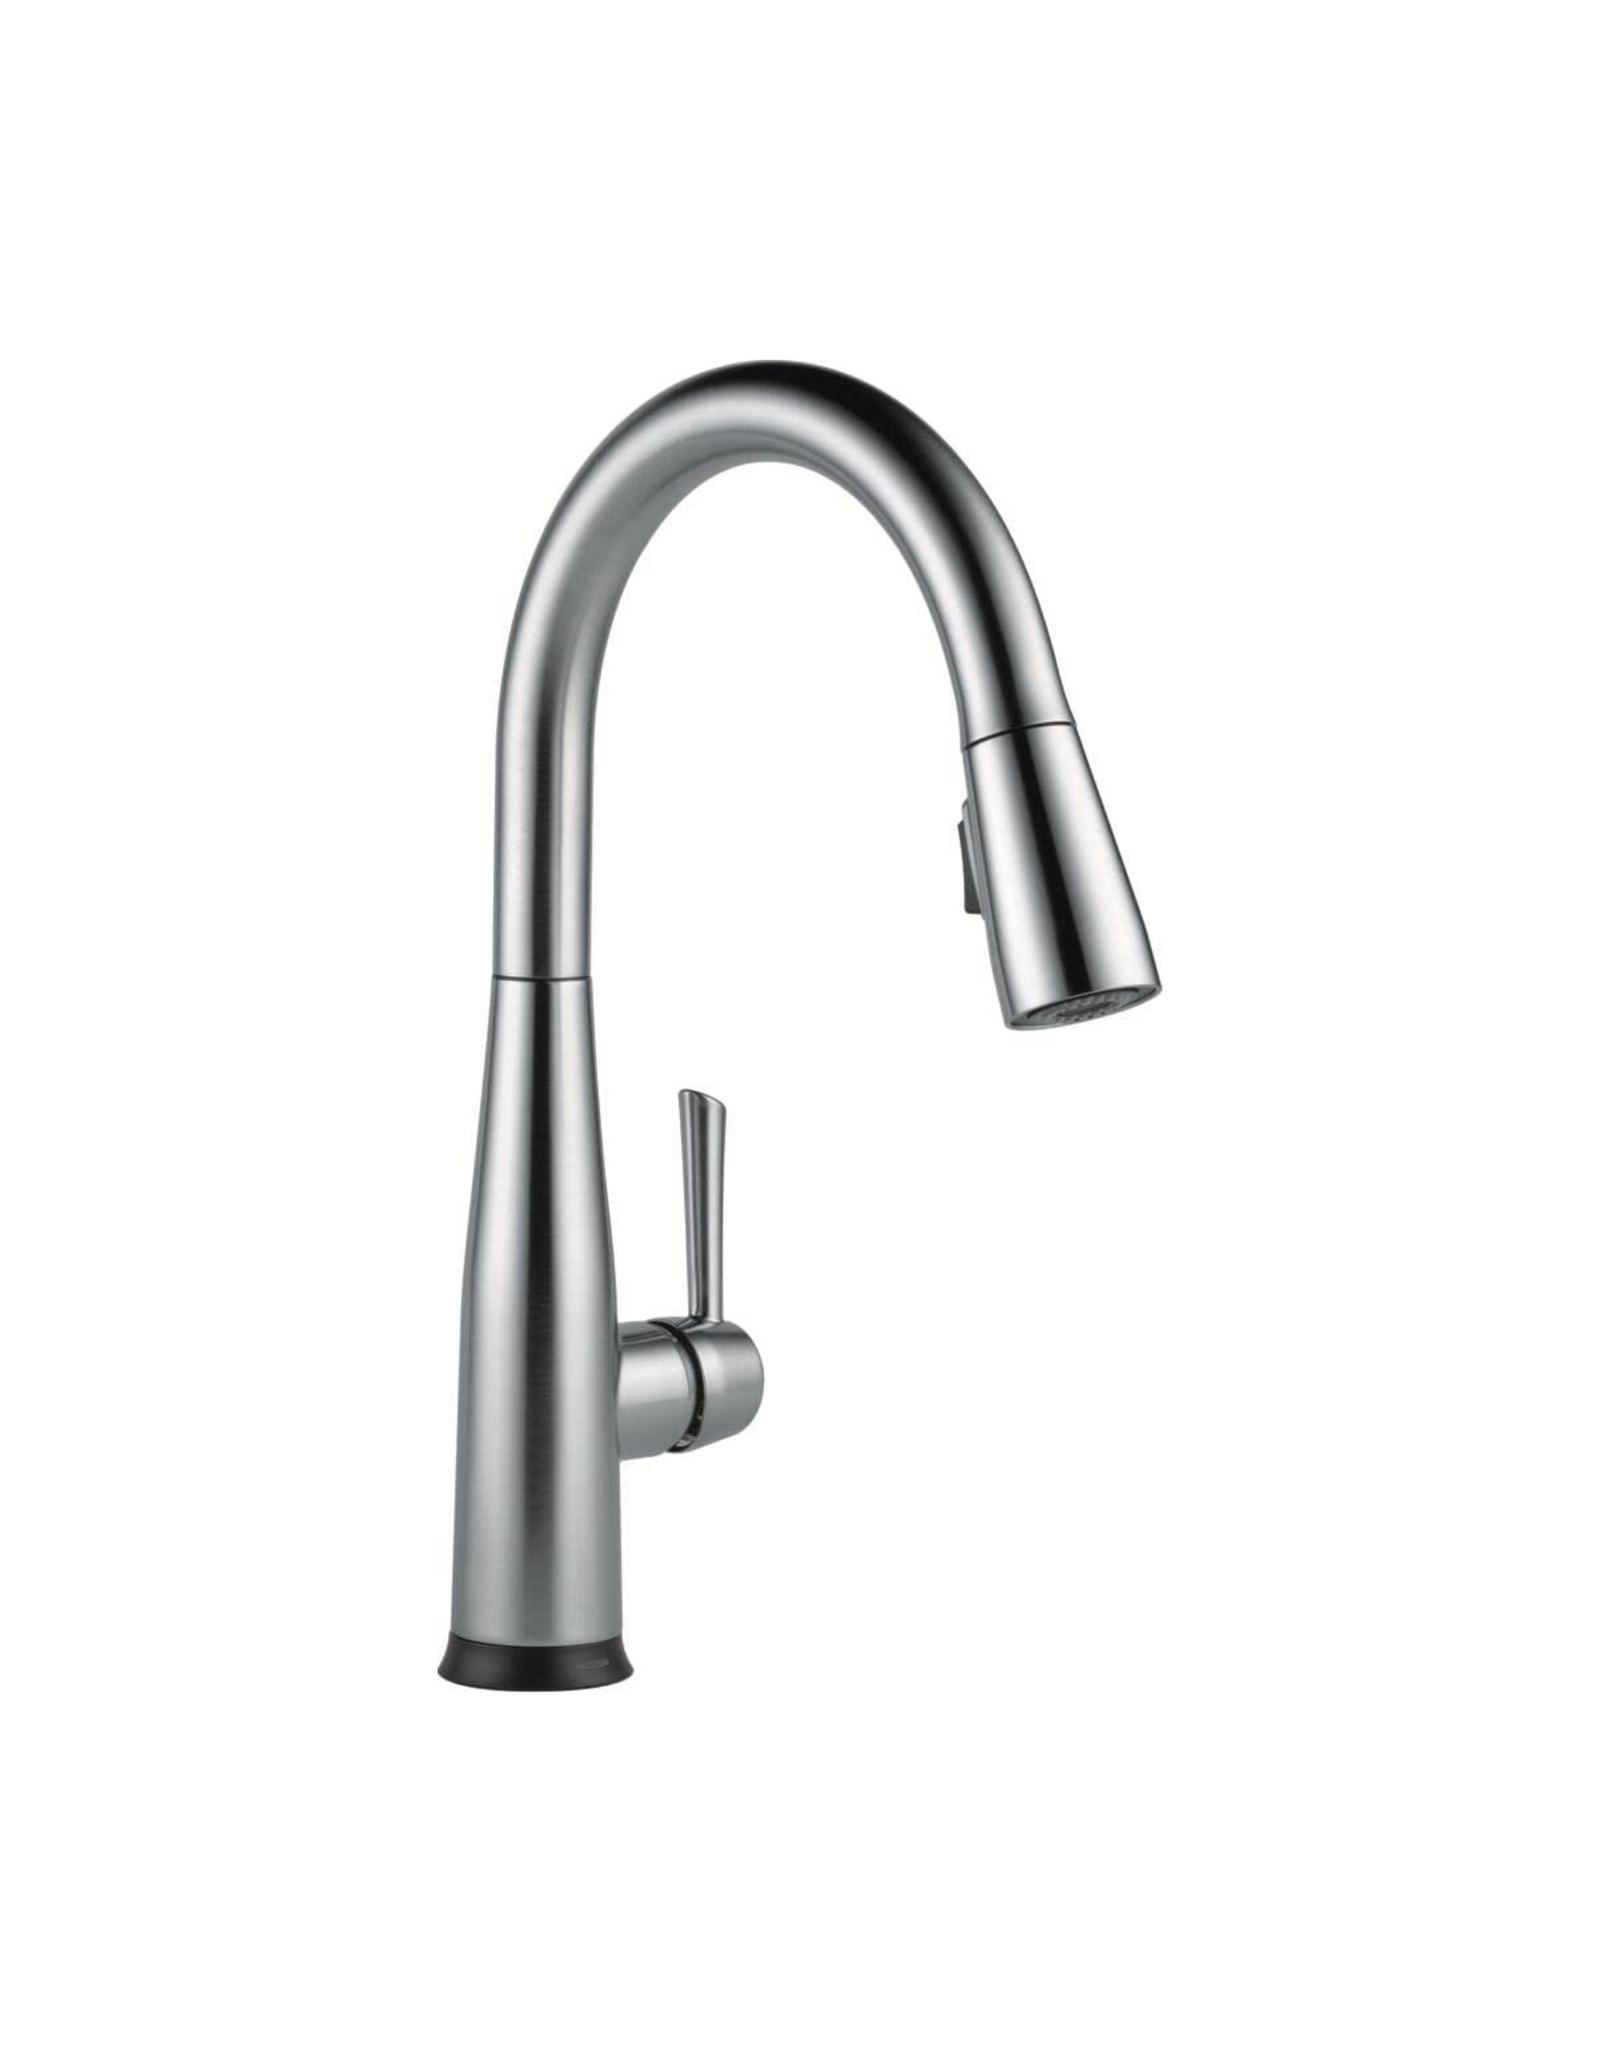 Delta Faucet Essa VoiceIQ Touchless Kitchen Faucet with Pull Down Sprayer 9113TV-AR-DST, Arctic Stainless